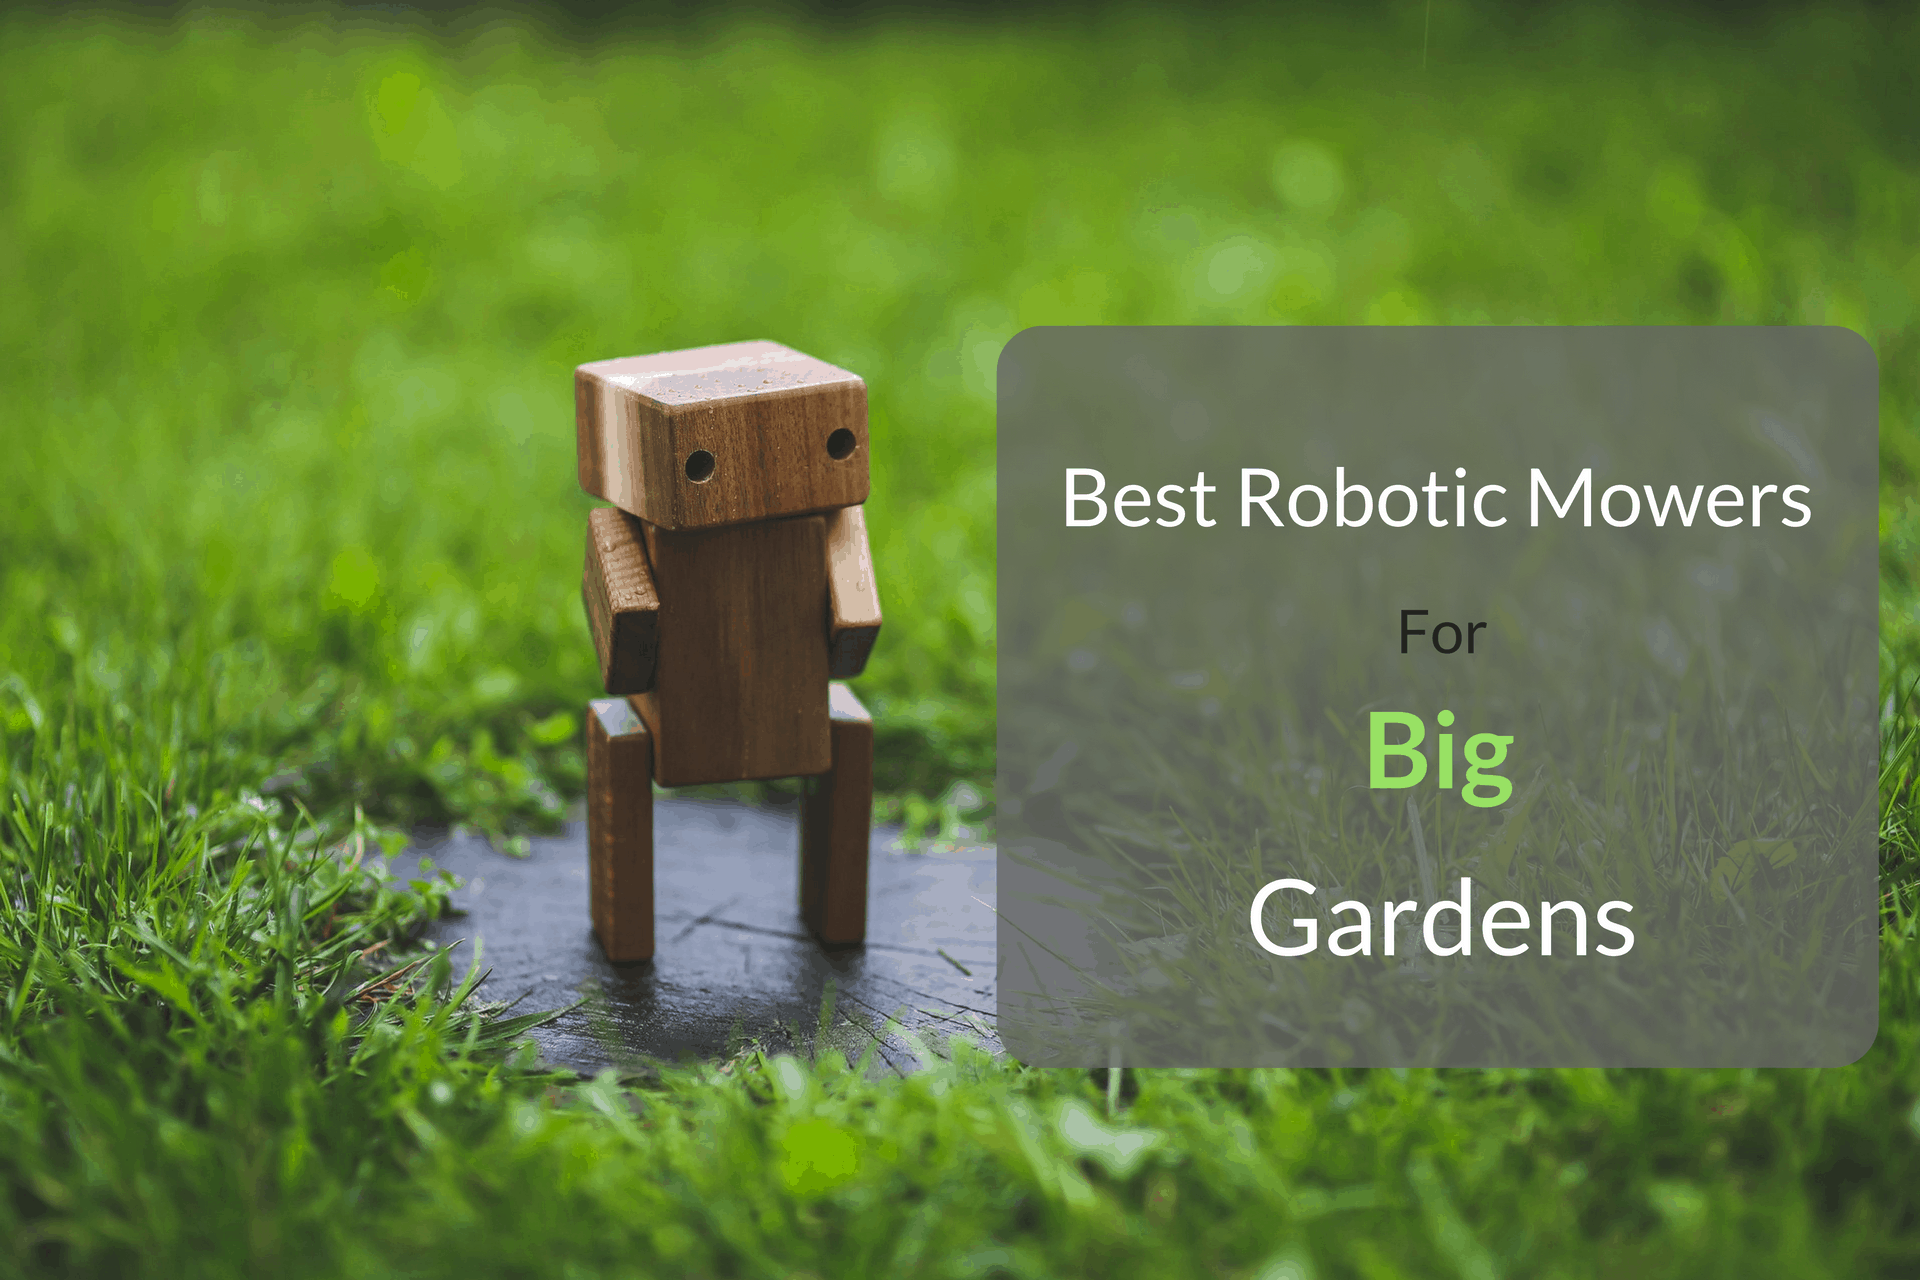 Best Robotic Lawn Mowers For Big Yards